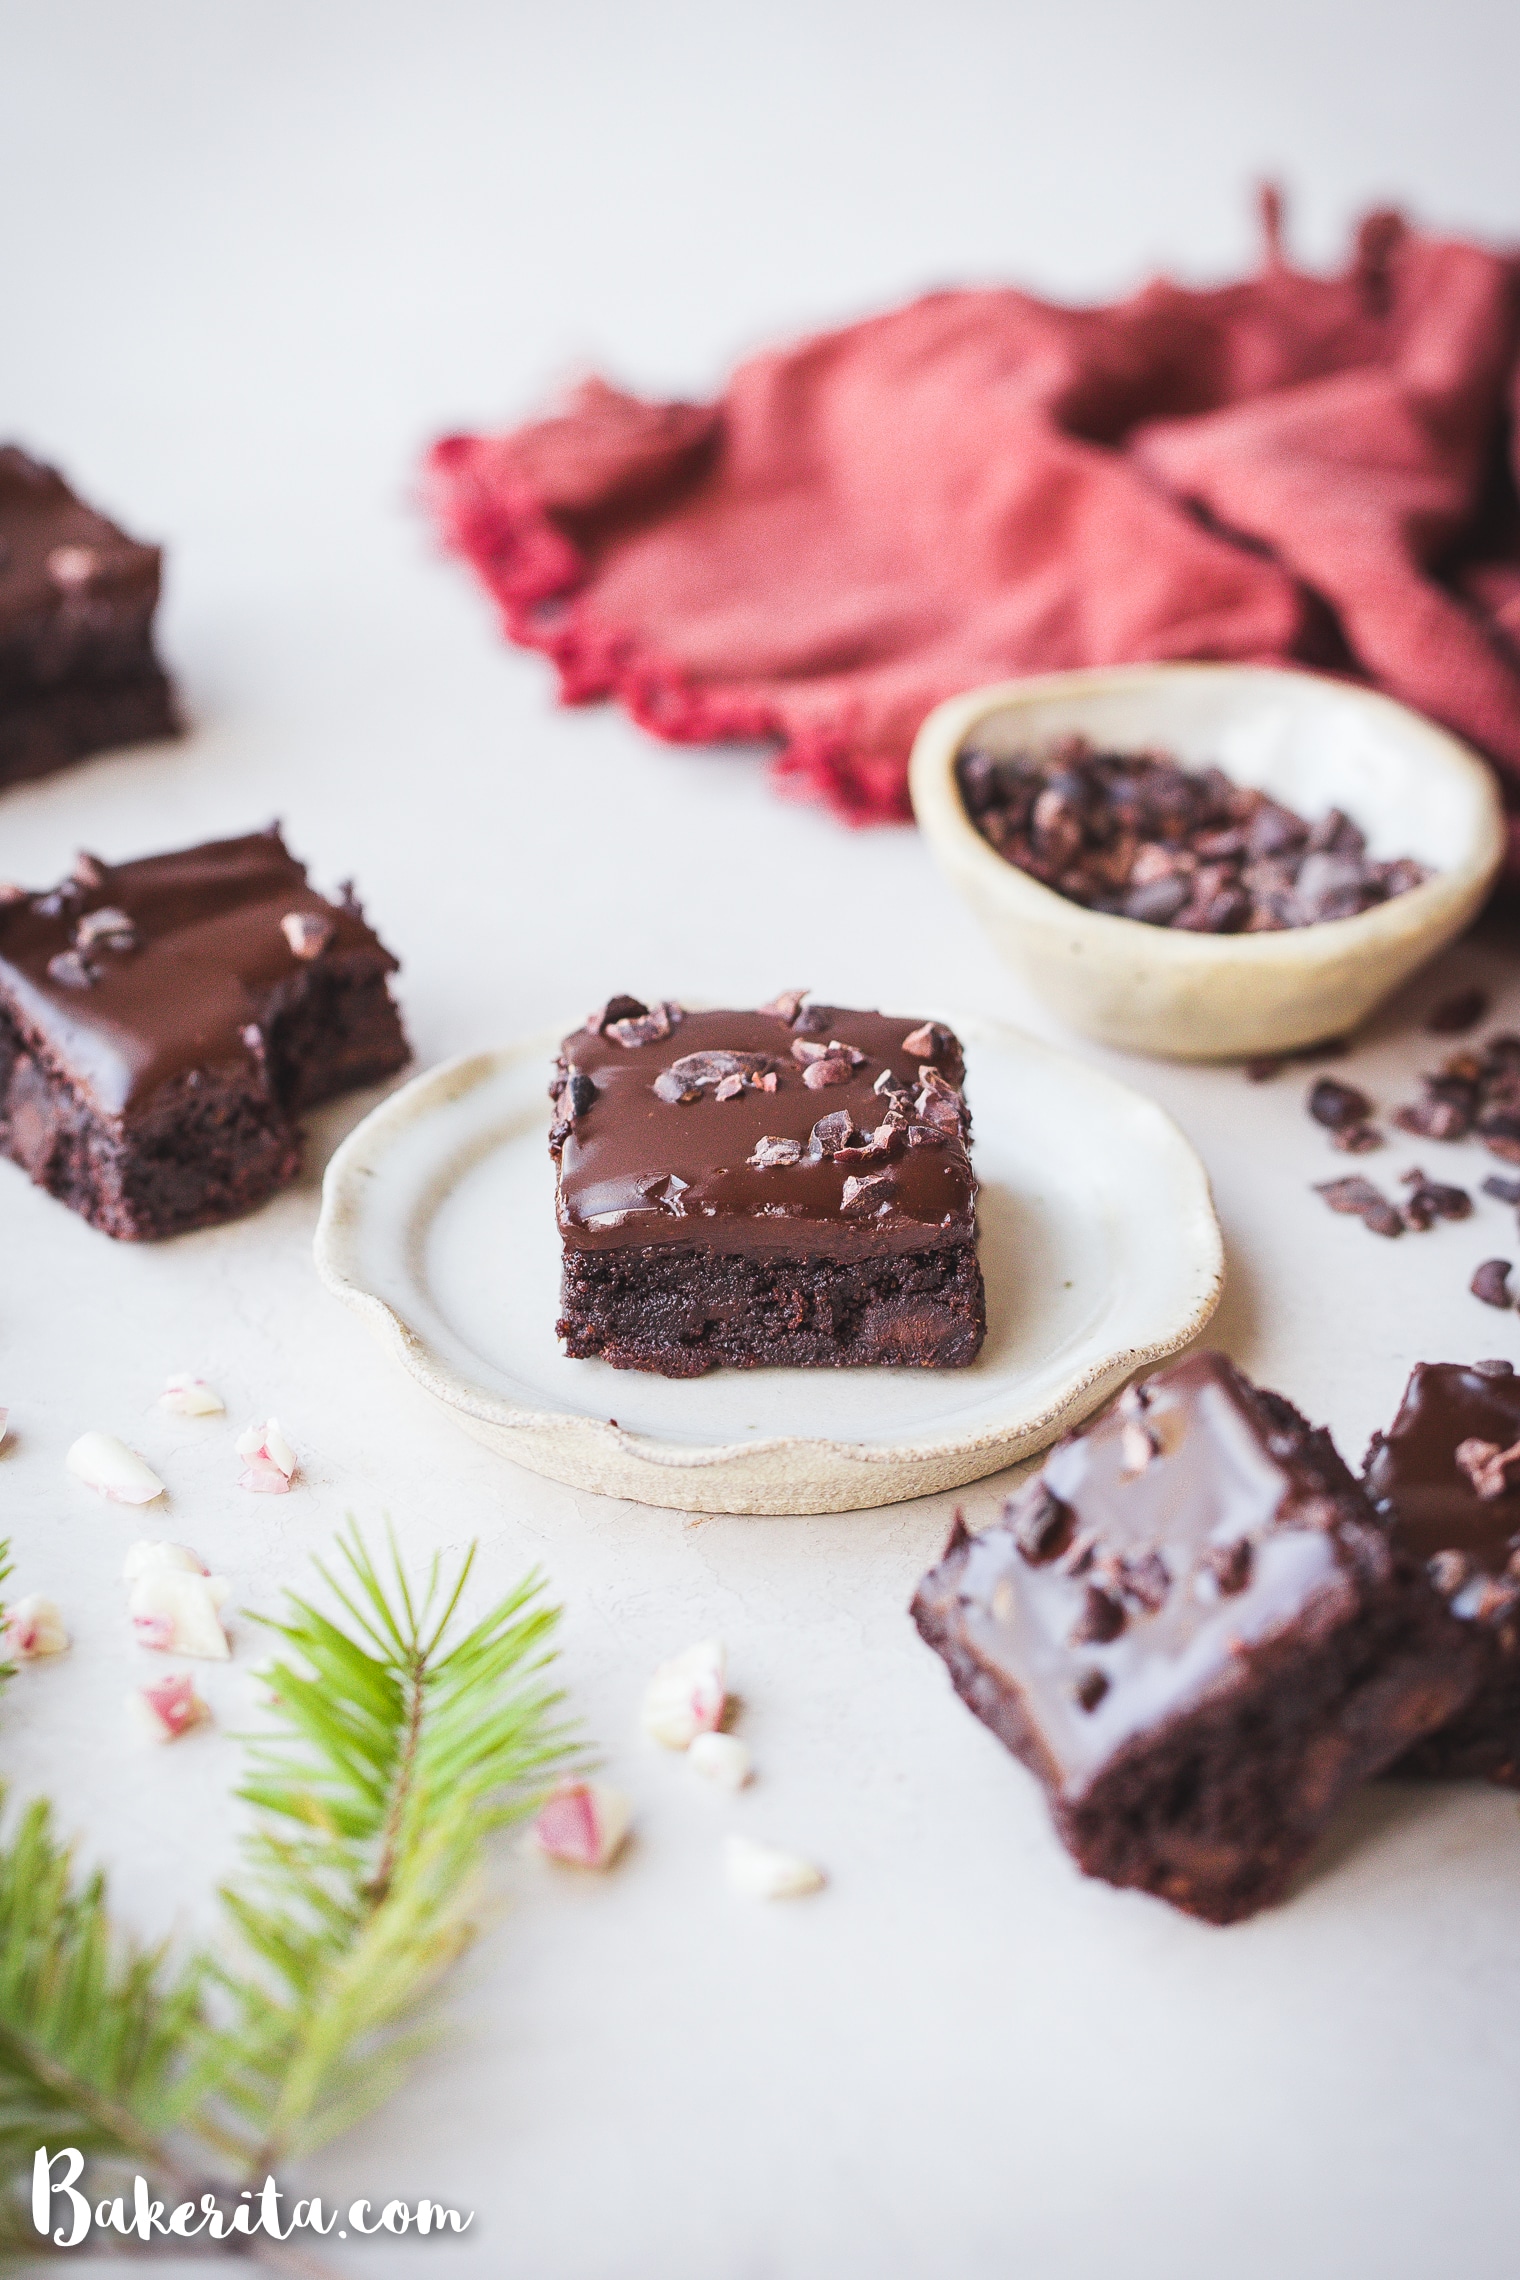 These Peppermint Brownies are so rich & fudgy, flavored with pure peppermint extract, and topped with luscious dark chocolate ganache. The paleo & vegan brownies are full of dark chocolate chips and cacao nibs.